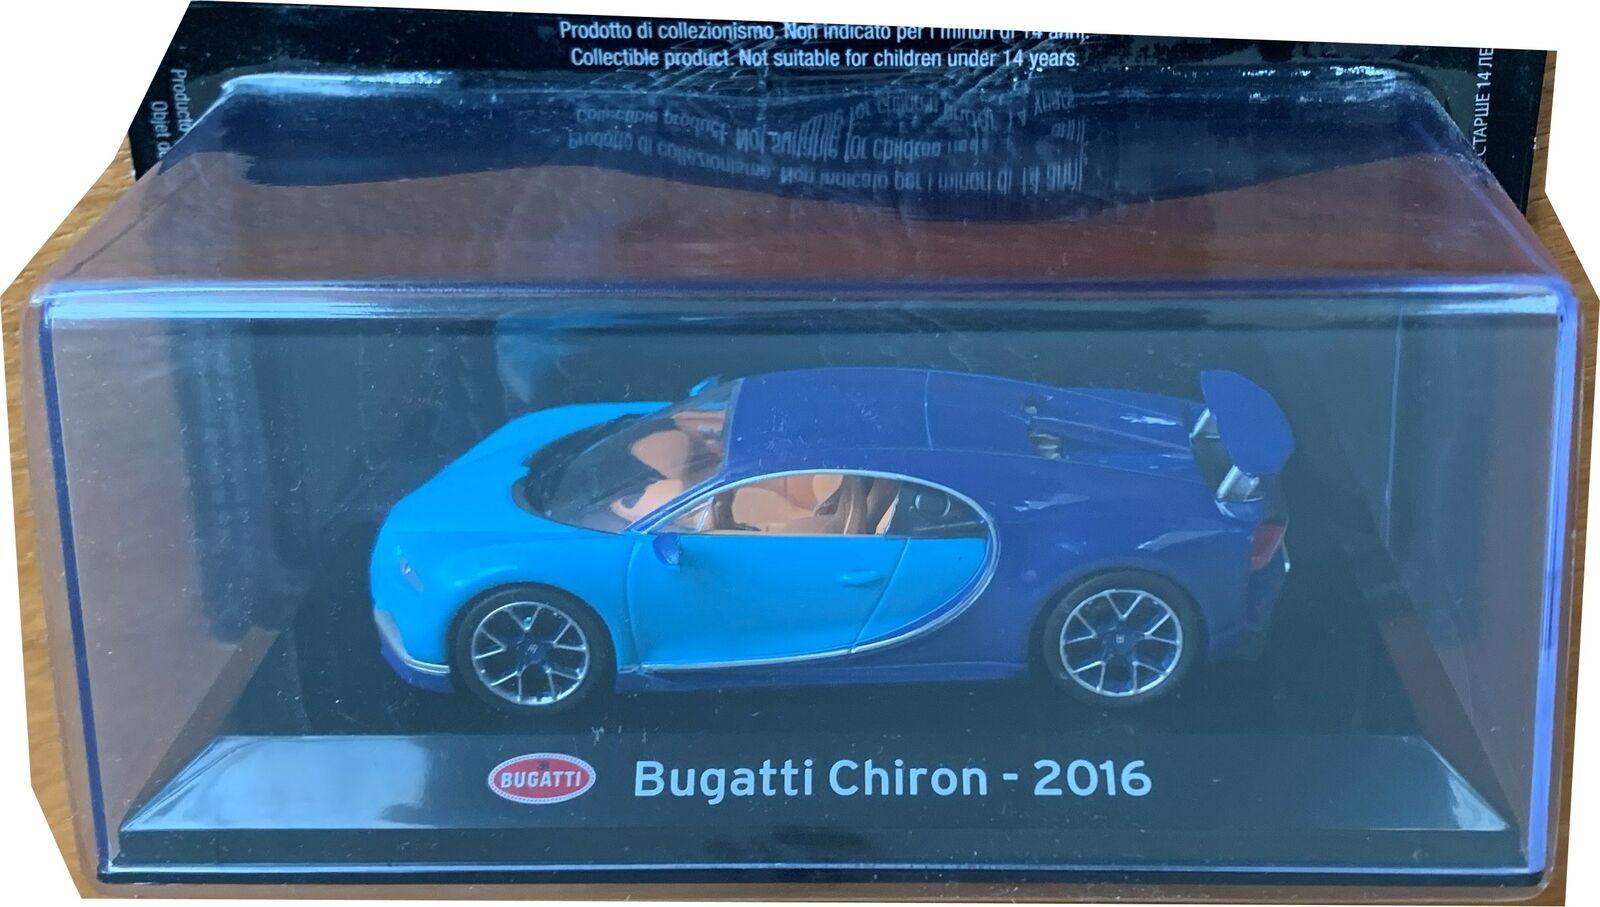 Panini Model Supercars Collection Die-Cast Metal Issue # 3 Bugatti Chiron 2016 